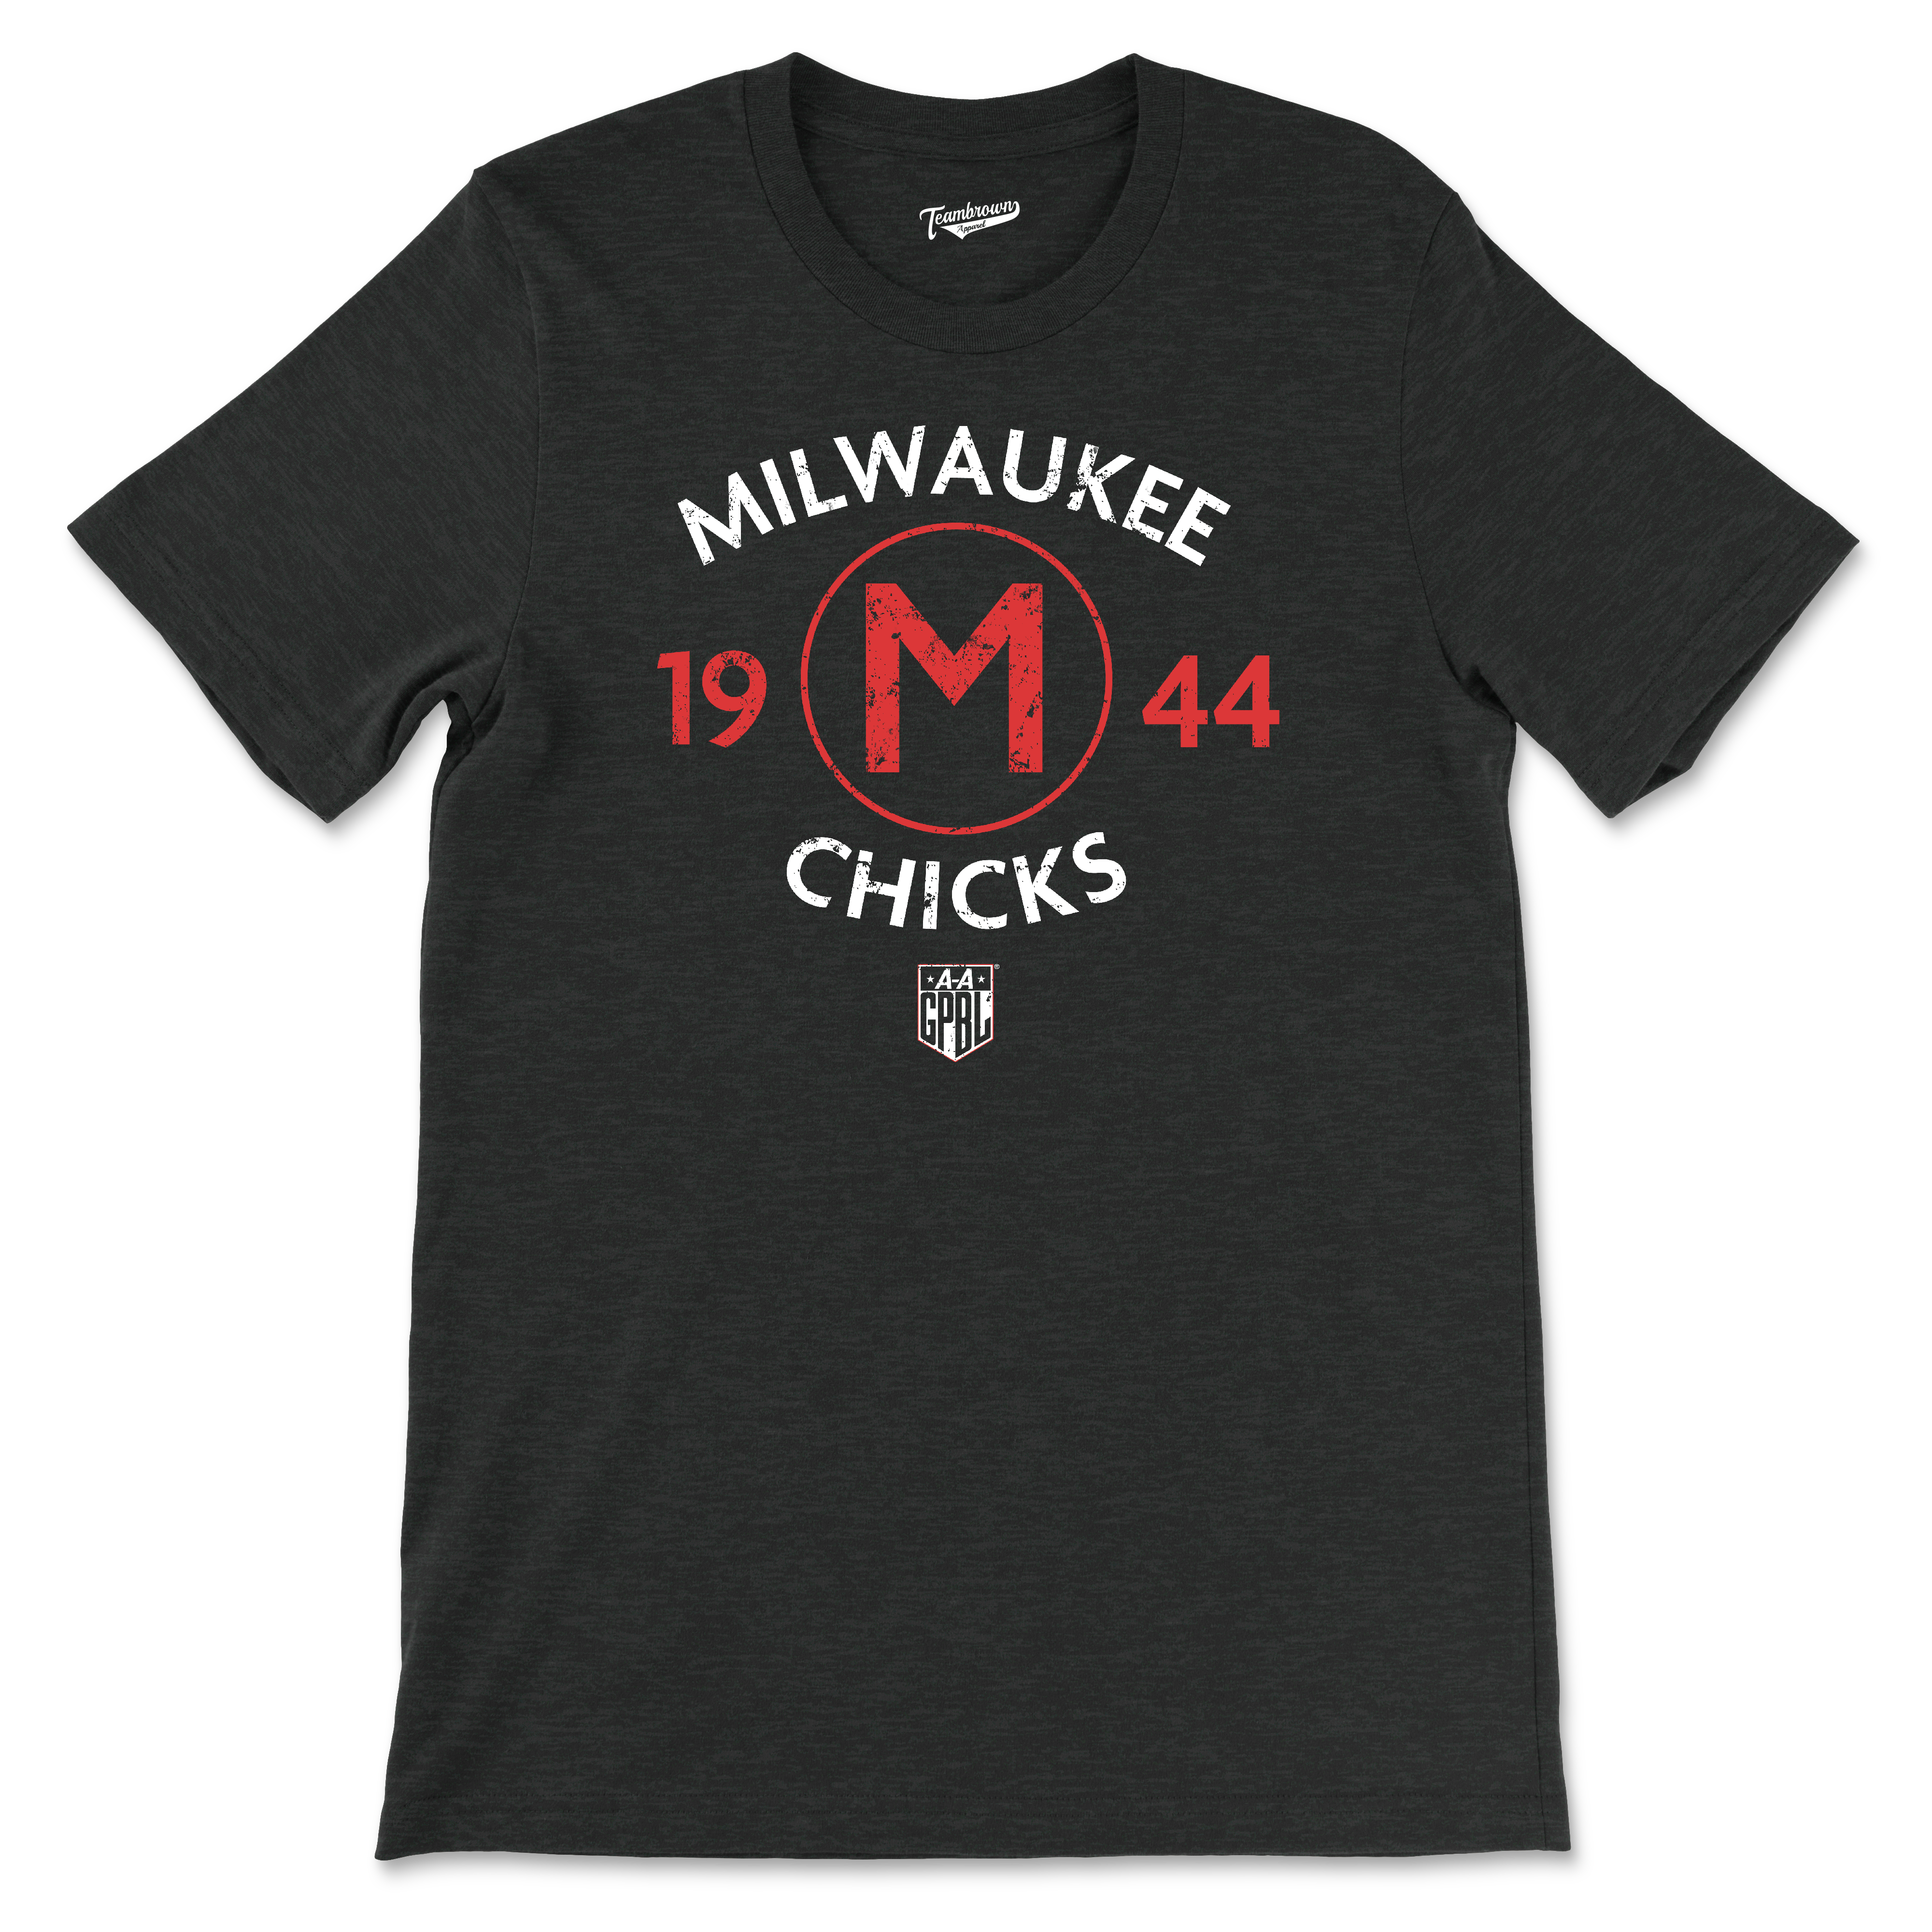 Milwaukee Chicks Champions - Unisex T-Shirt | Officially Licensed - AAGPBL